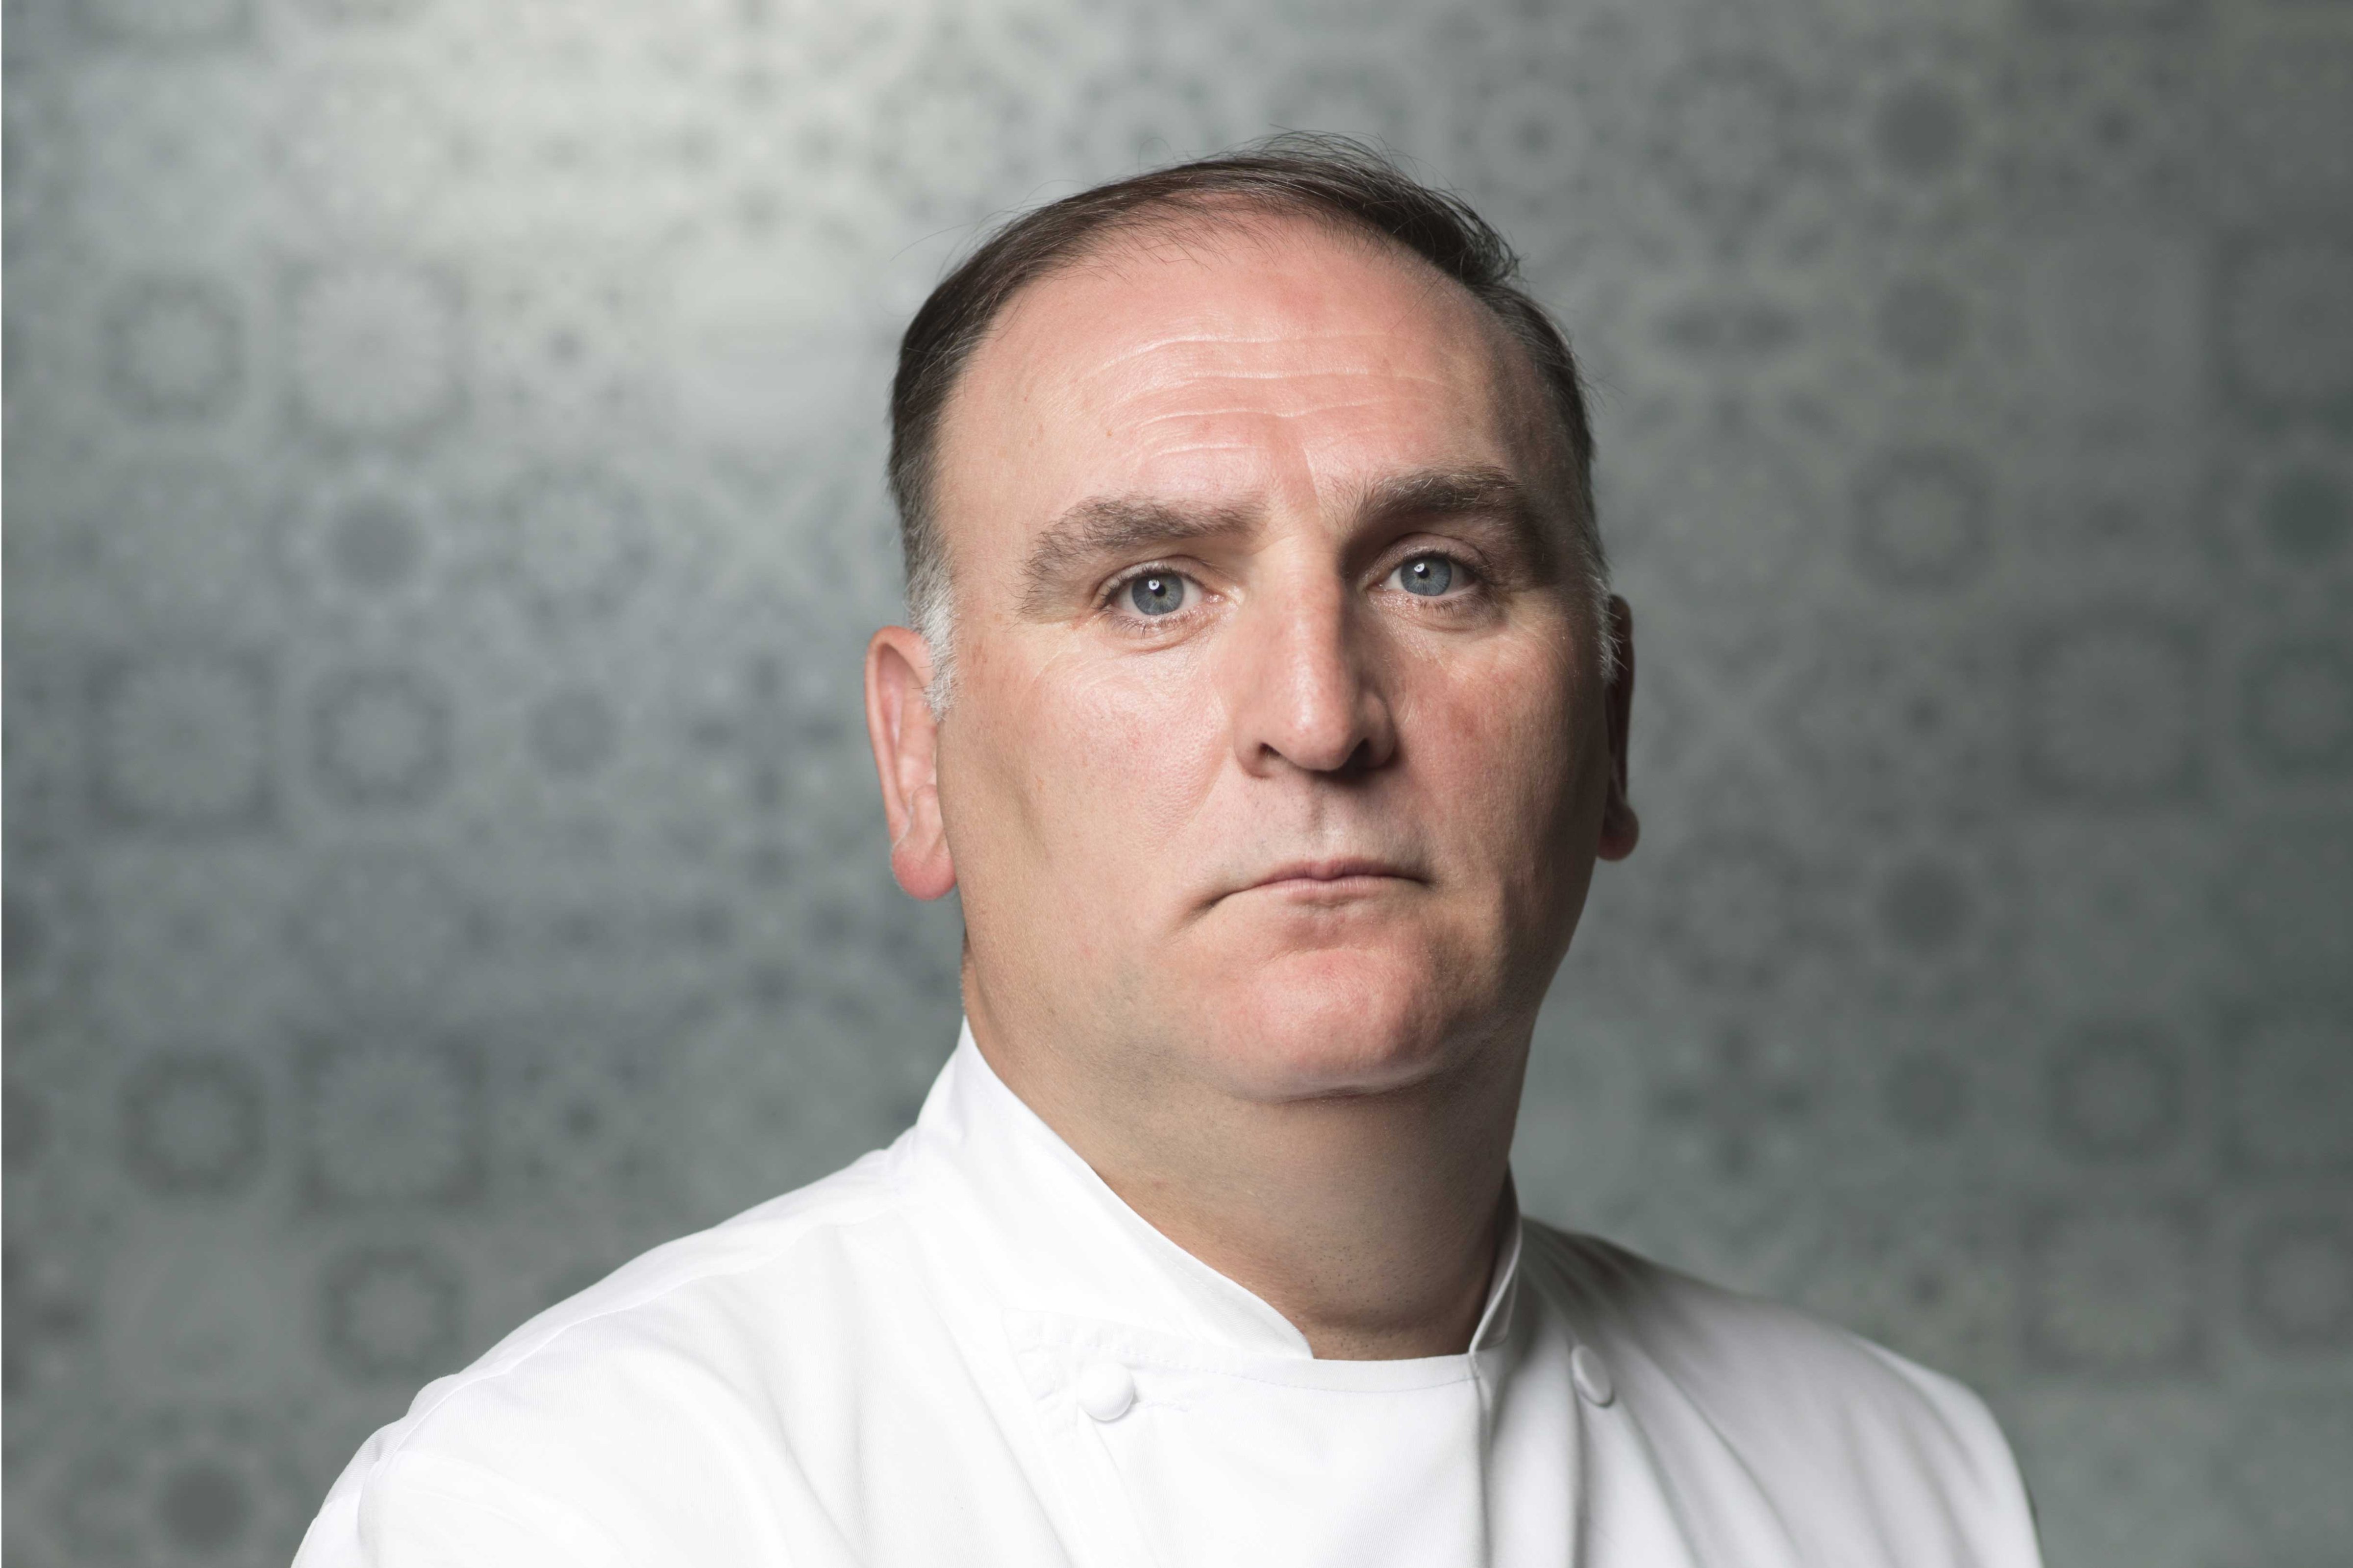 Celebrity Chef and Restaurateur Jose Andres photographed at Minibar in Washington, D.C. on May 01, 2014. (Marvin Joseph—The Washington Post/Getty Images)